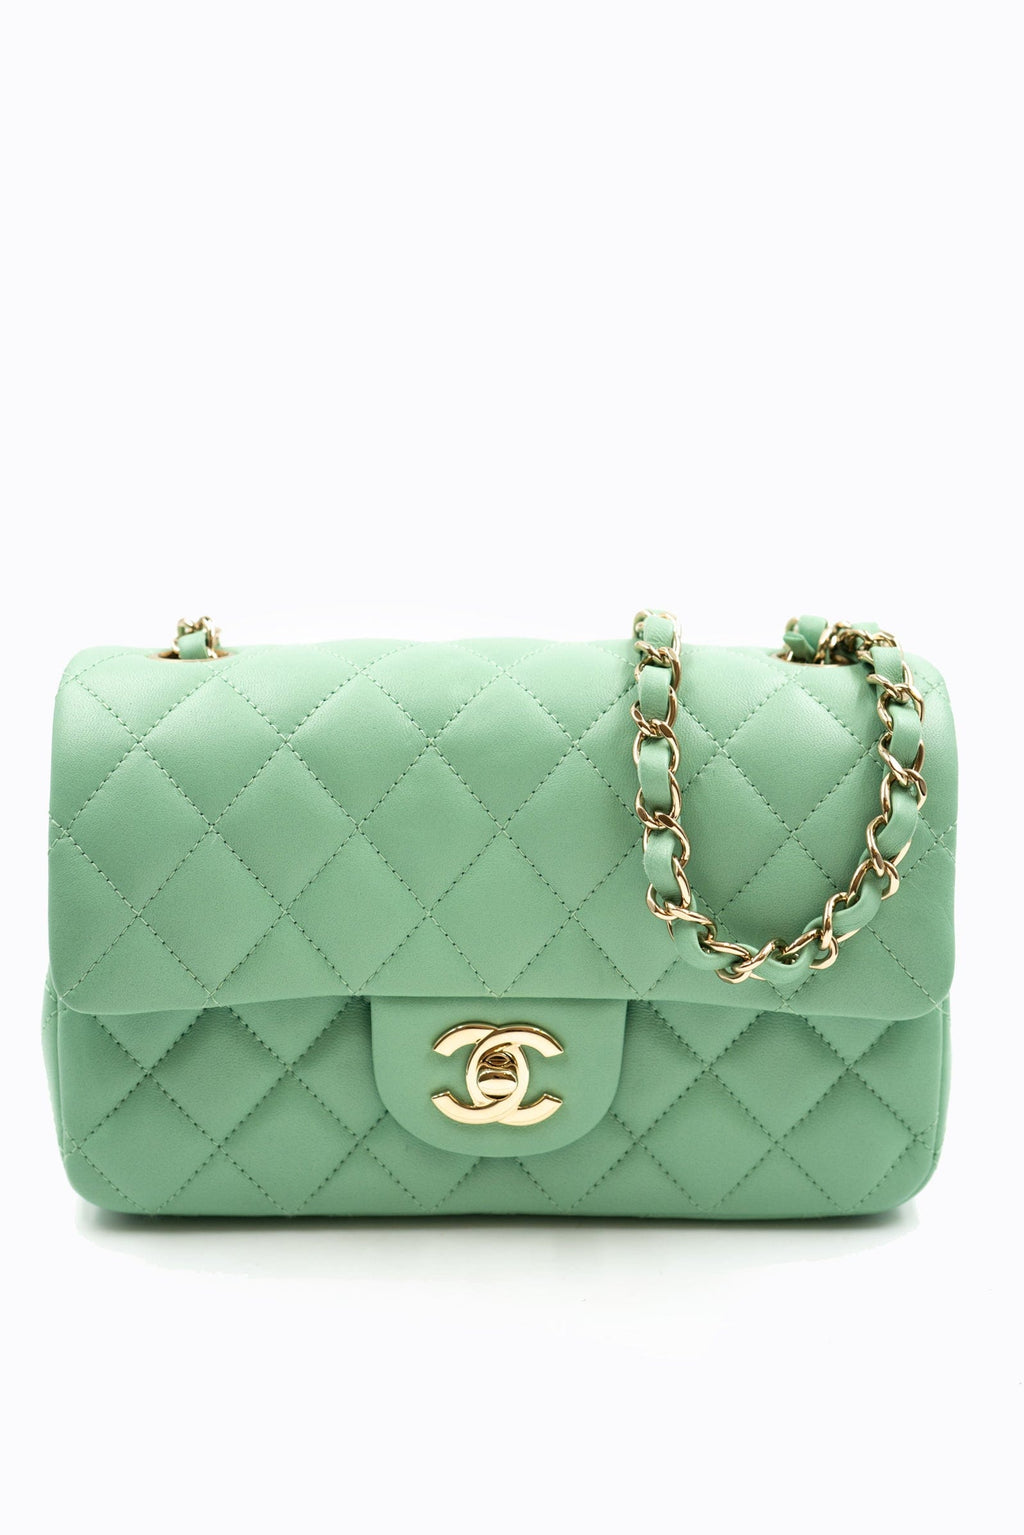 Chanel Classic Small 22C Mint Green Caviar Ghw Bag Luxury Bags  Wallets  on Carousell